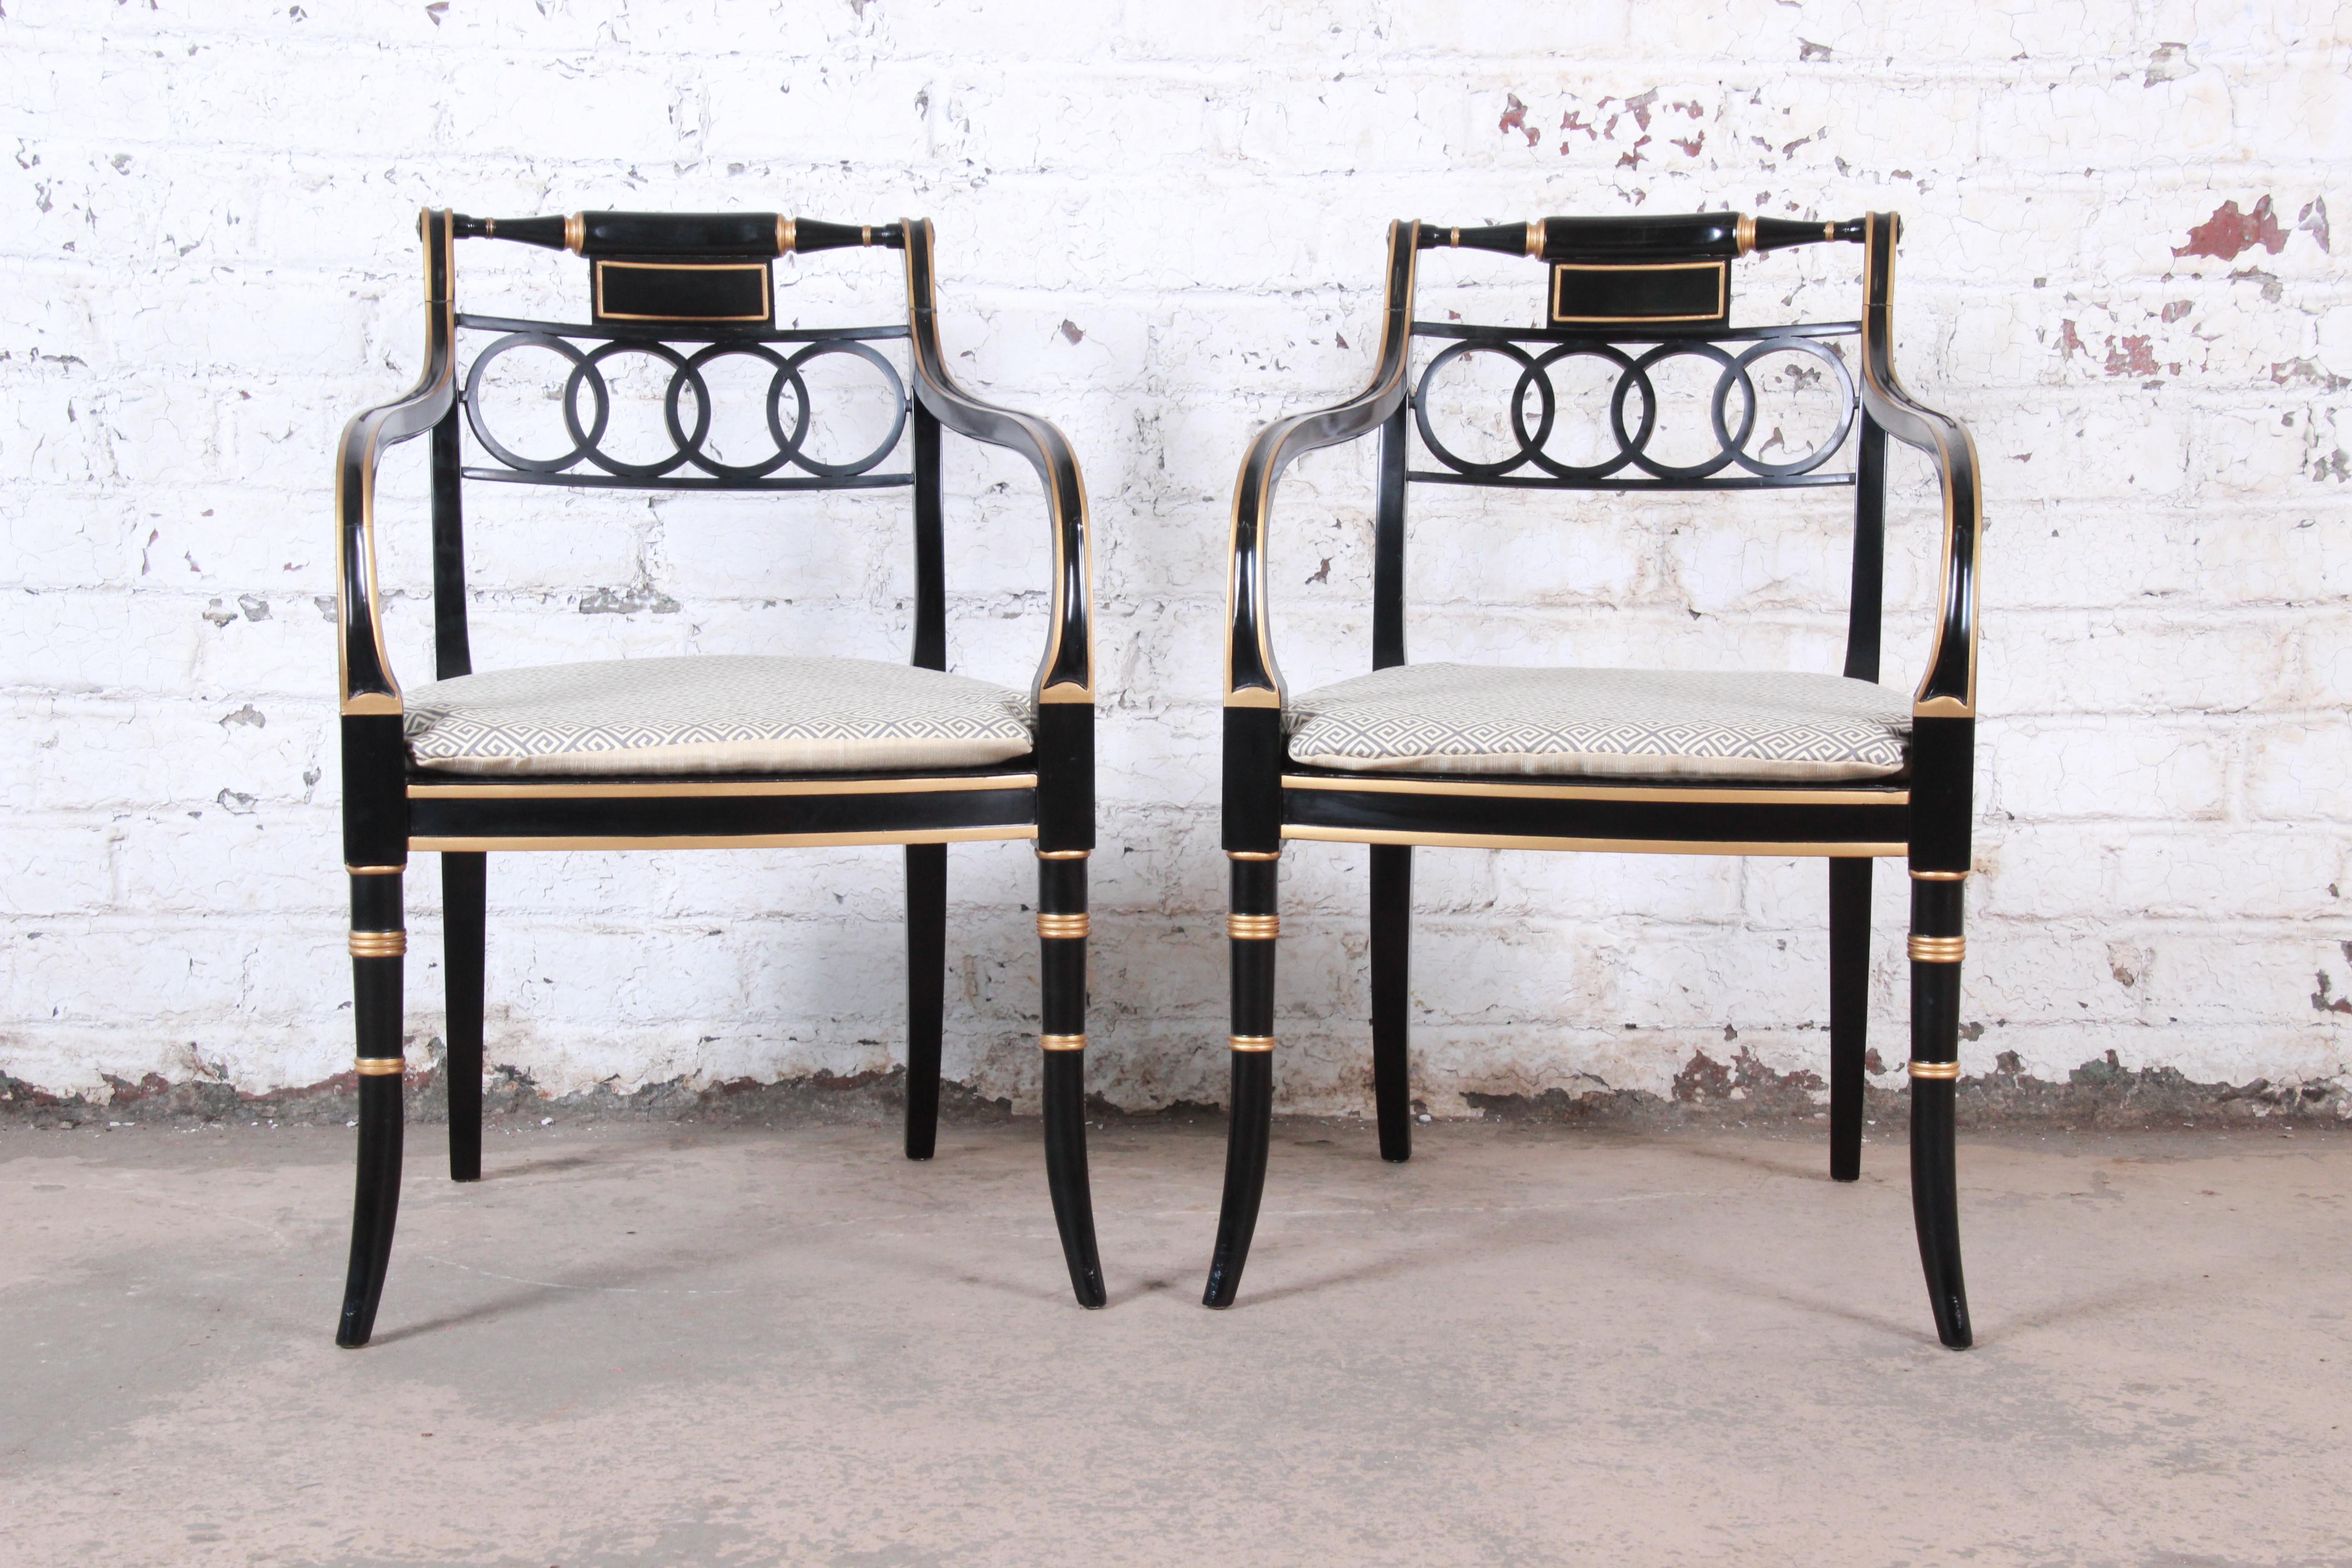 An exceptional pair of Regency style armchairs from the Historic Charleston collection by Baker Furniture. The chairs feature stunning ebonized and gold gilt solid wood frames with caned seats and removable seat cushions with Greek key design. Made